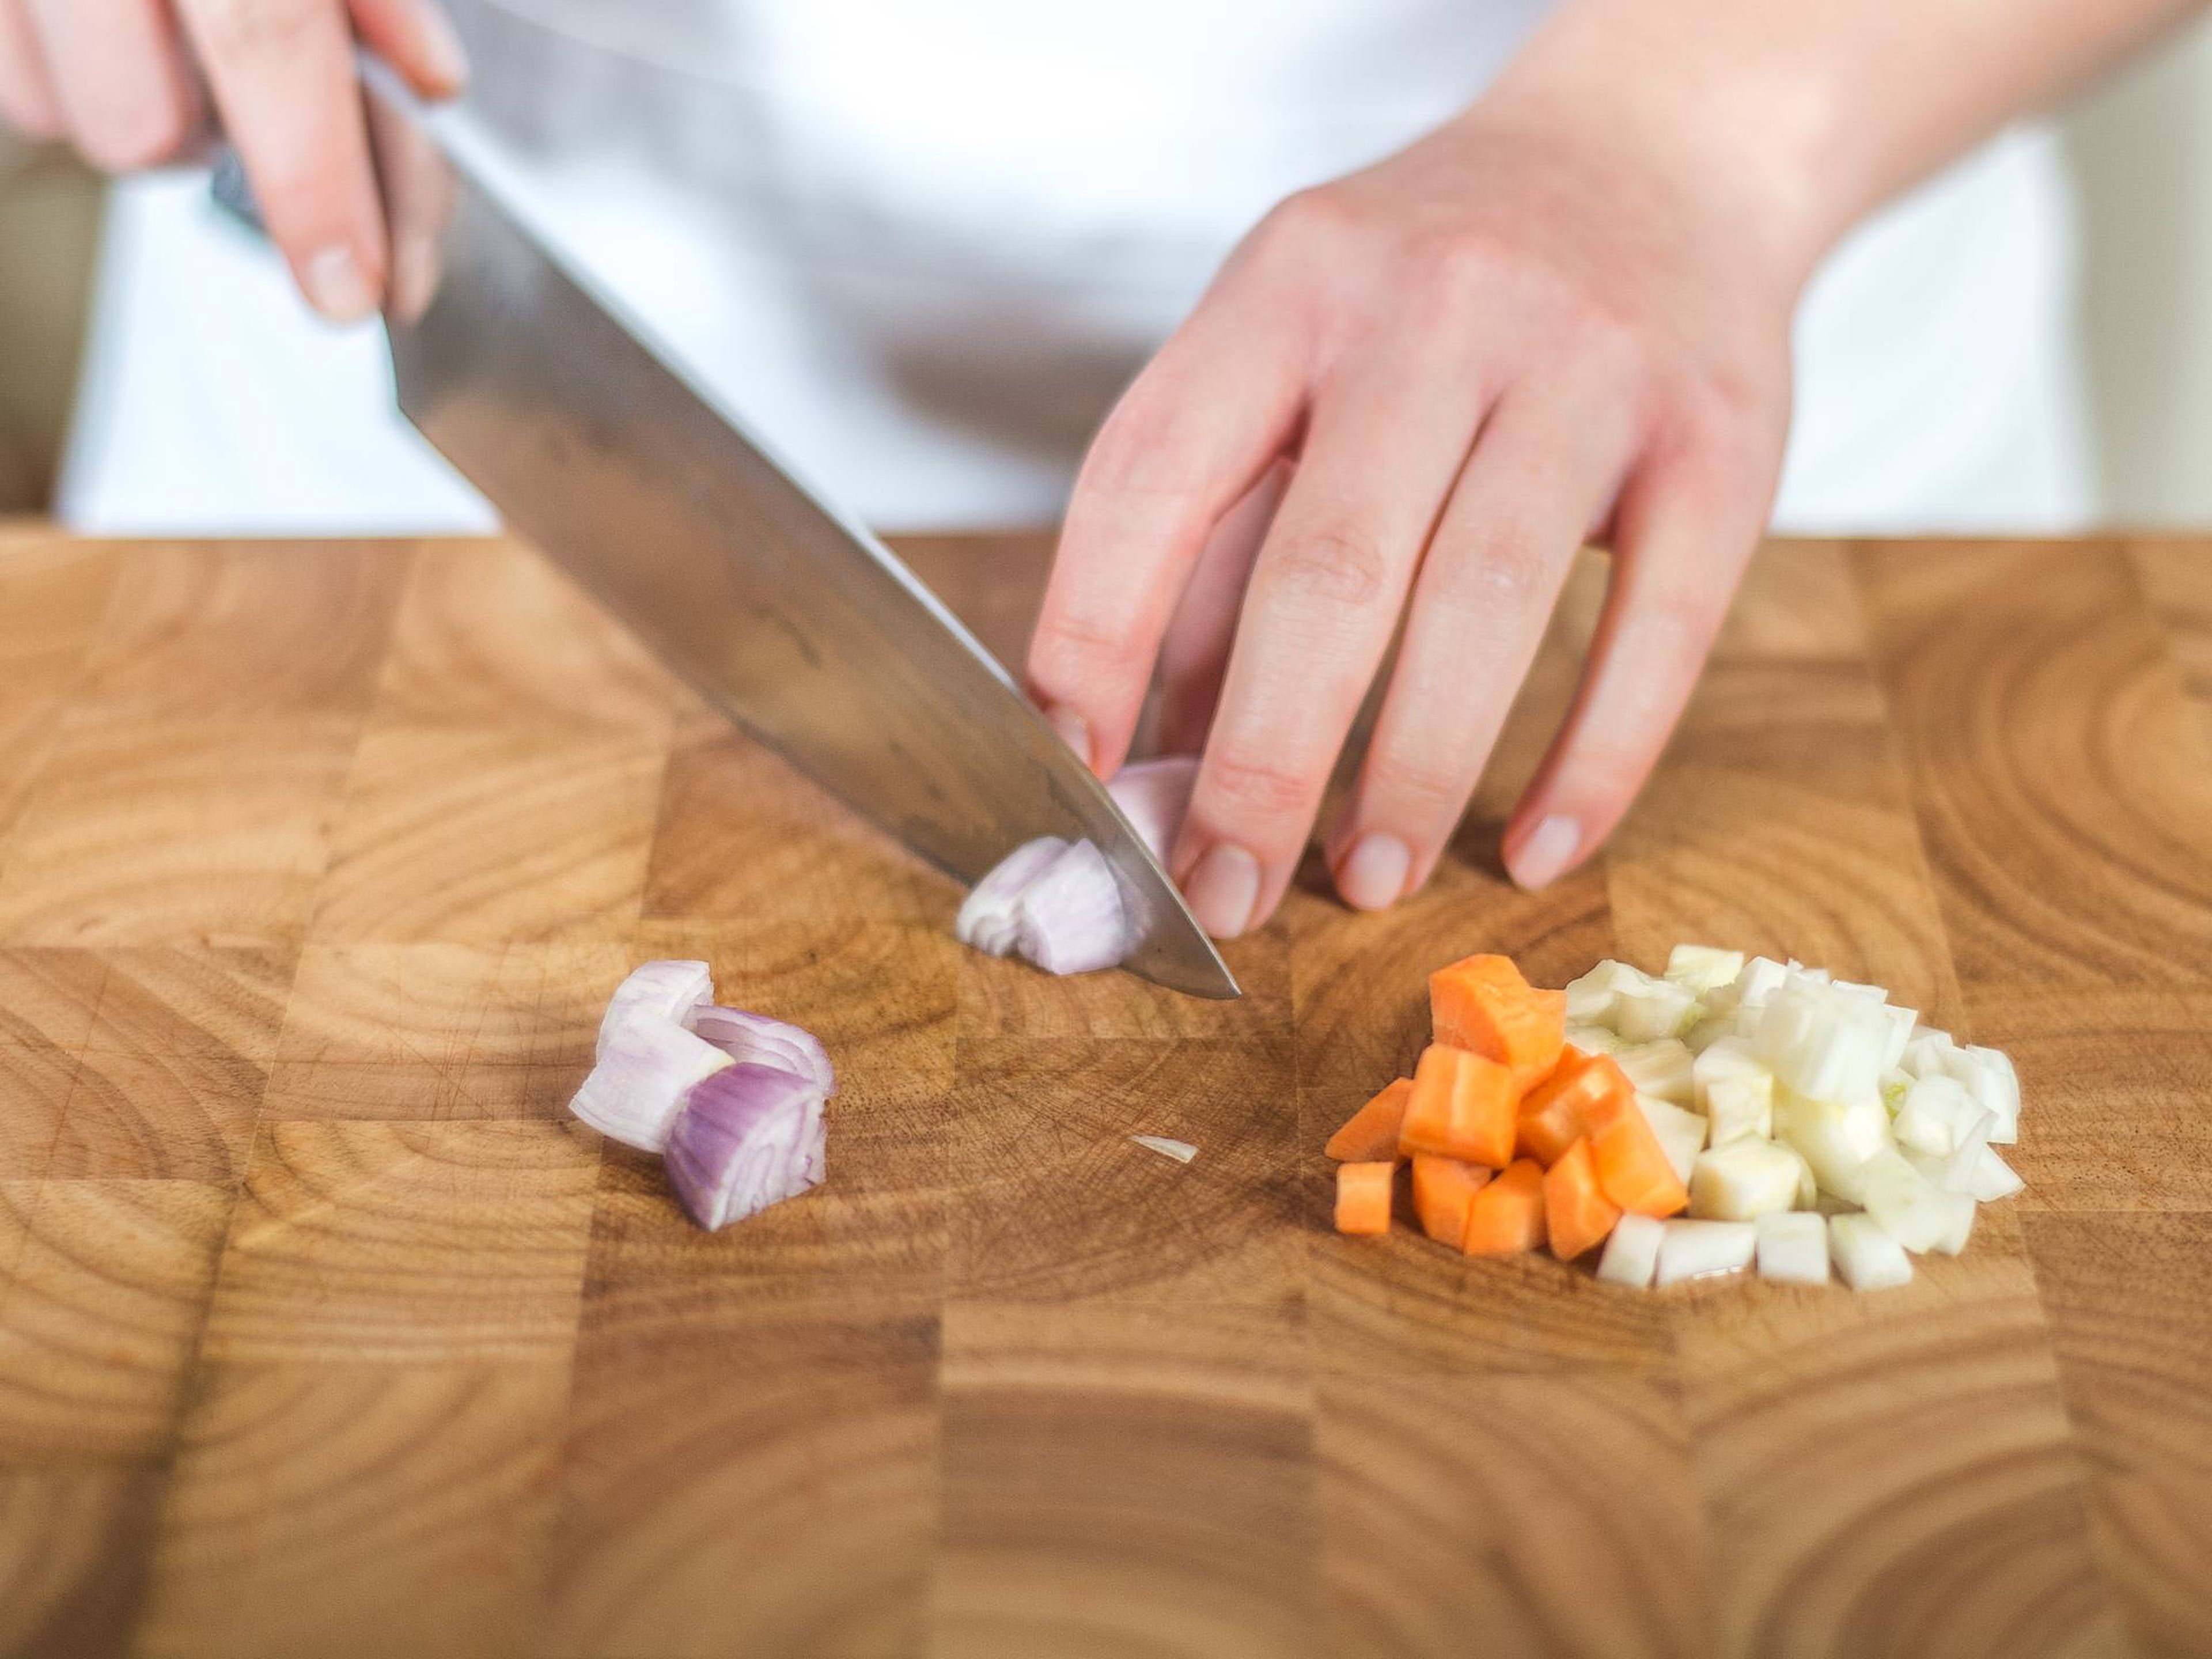 Peel, crush, and roughly chop the garlic cloves. Finely dice the fennel, carrots, and shallots.